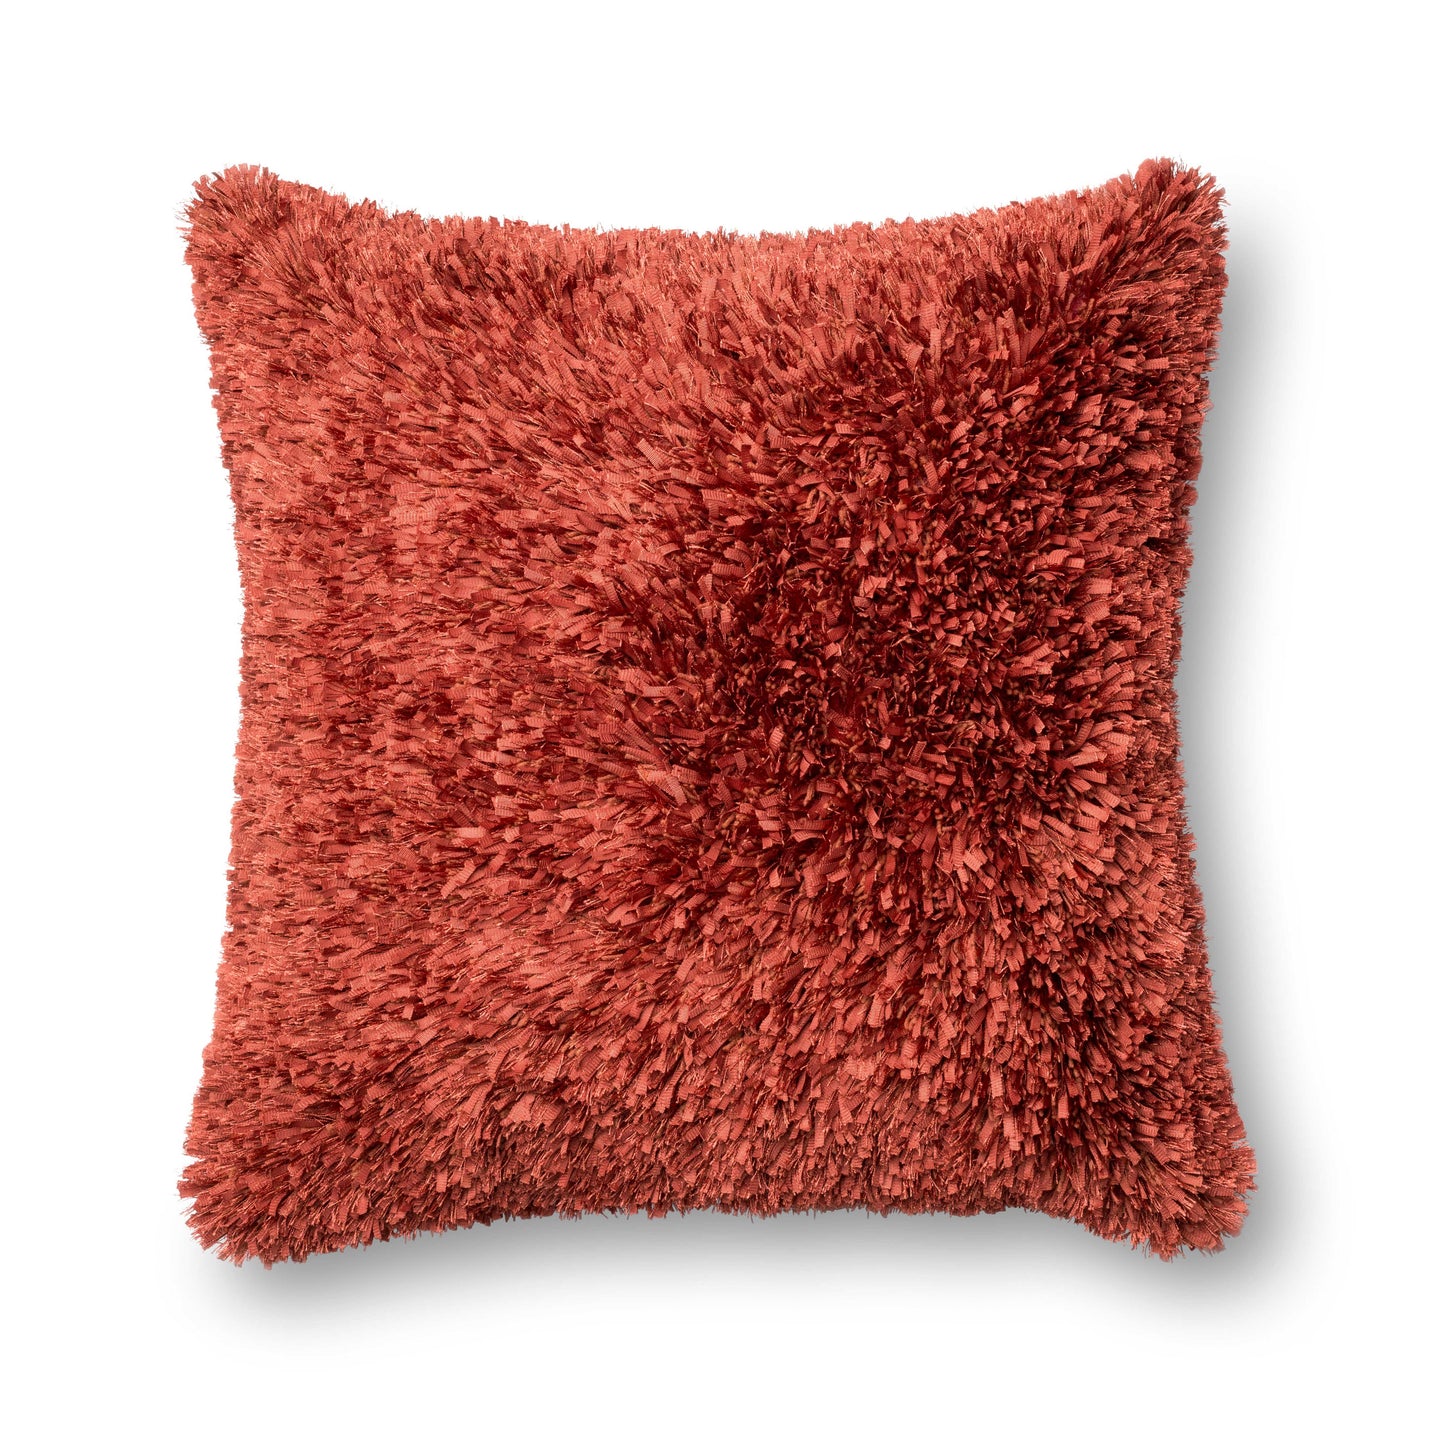 Photo of a pillow;  P0045 Rust 22" x 22" Cover w/Poly Pillow